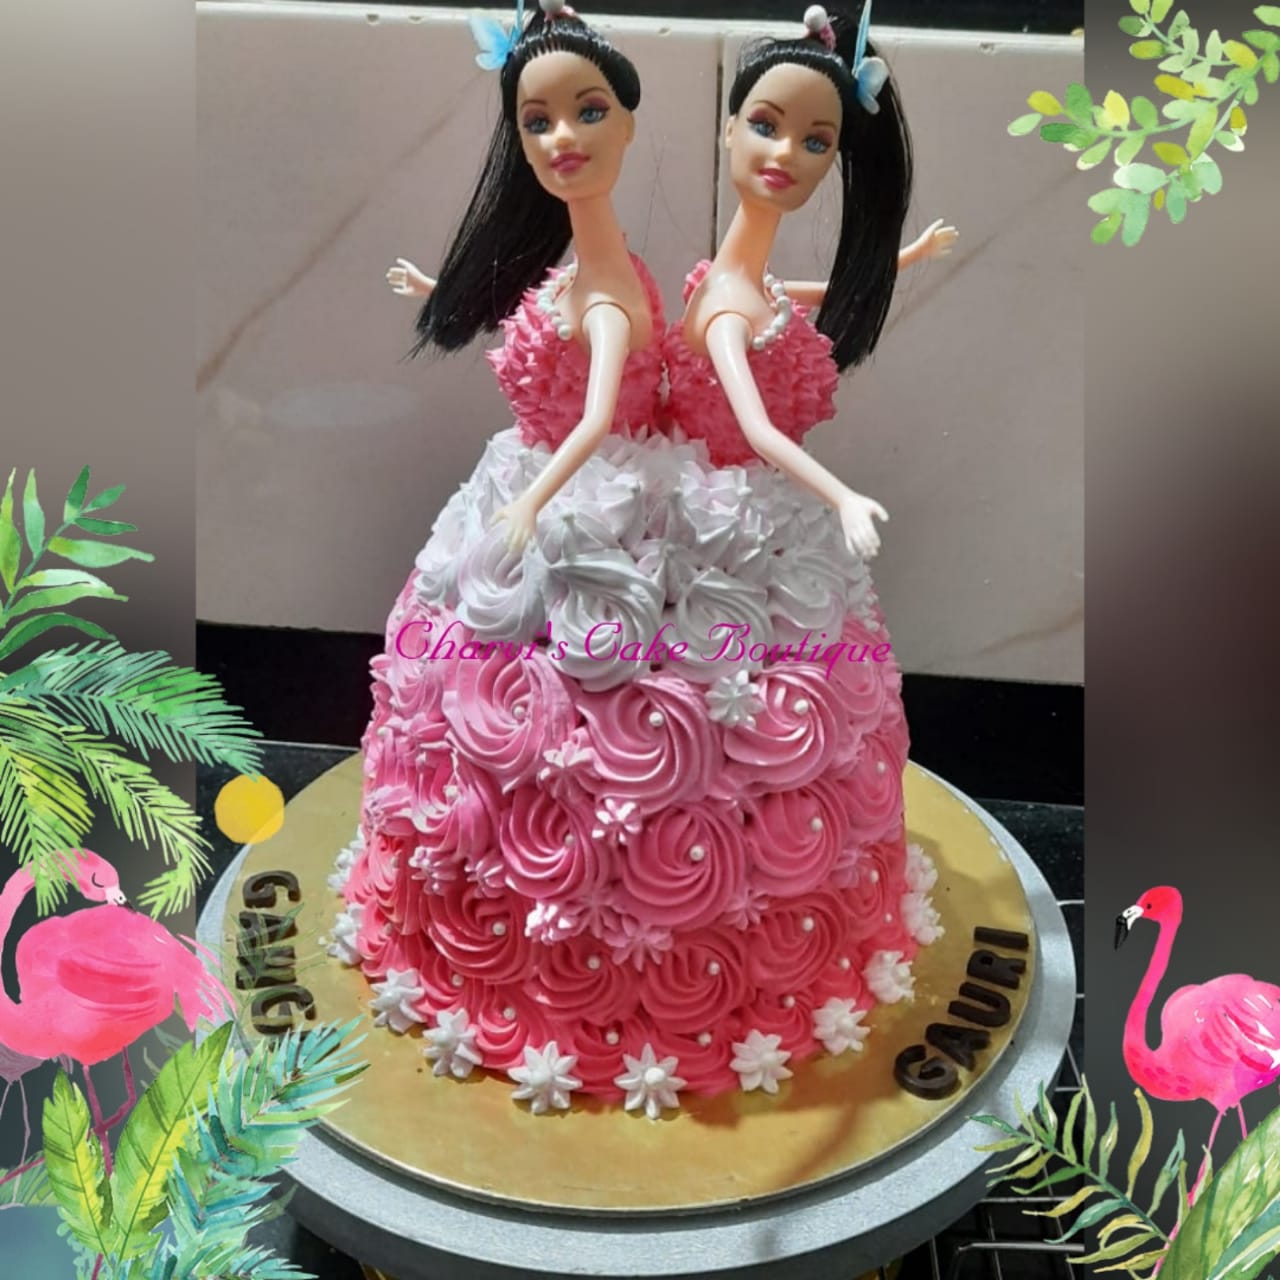 Chocolate Doll Cake Designs, Images, Price Near Me